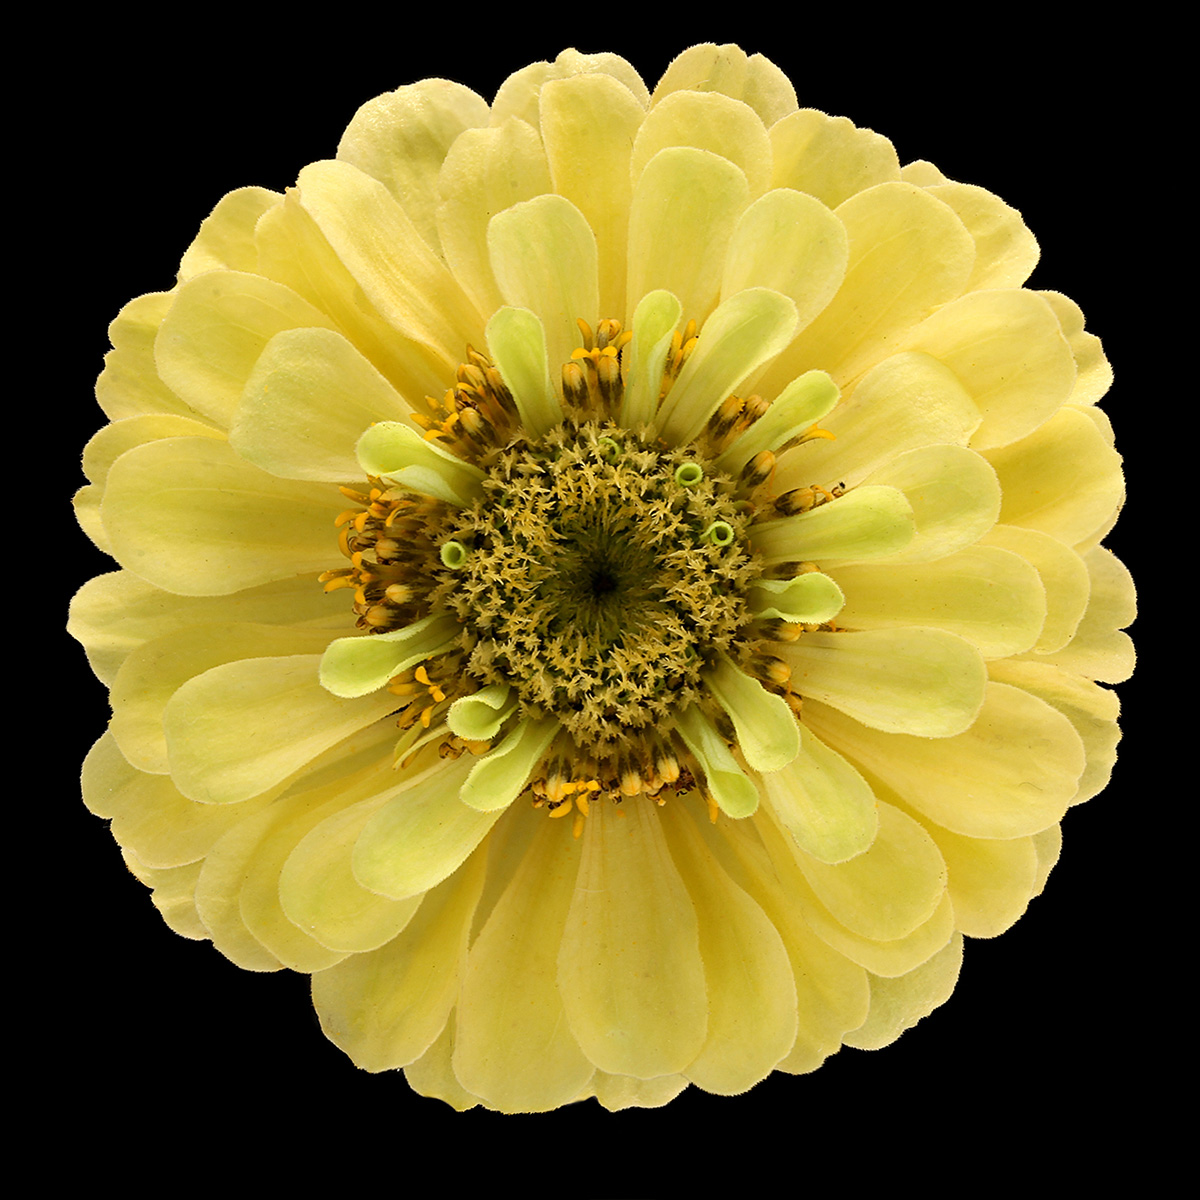 Why Han Fokkink Is In Mad About Zinnia and Rudbeckia - Zinnia 04